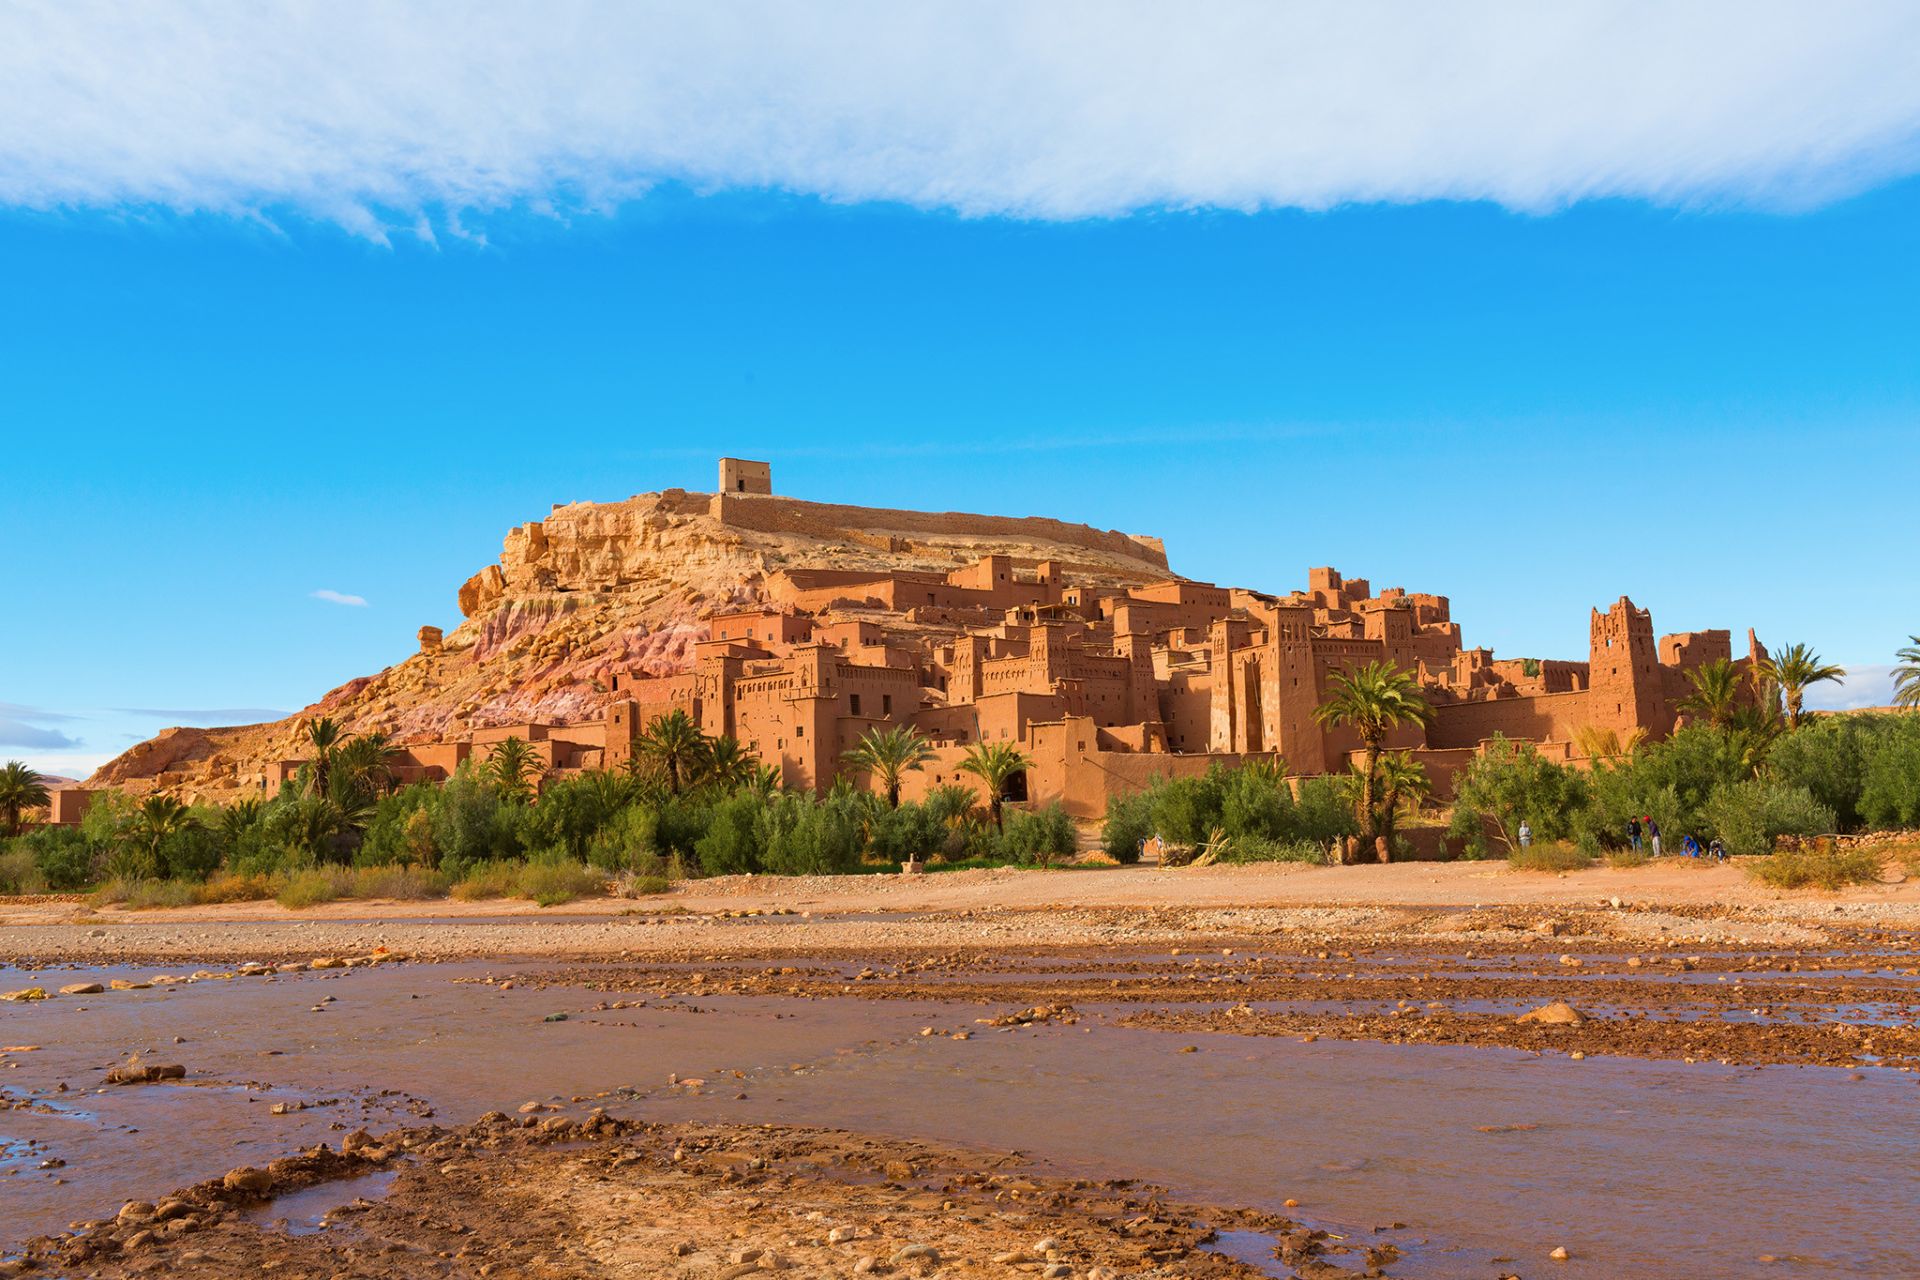 Marocco Fortified-City-Ksar-with-Mud-Houses-in-the-Kasbah-Ait-Benhaddou-near-Ouarzazate